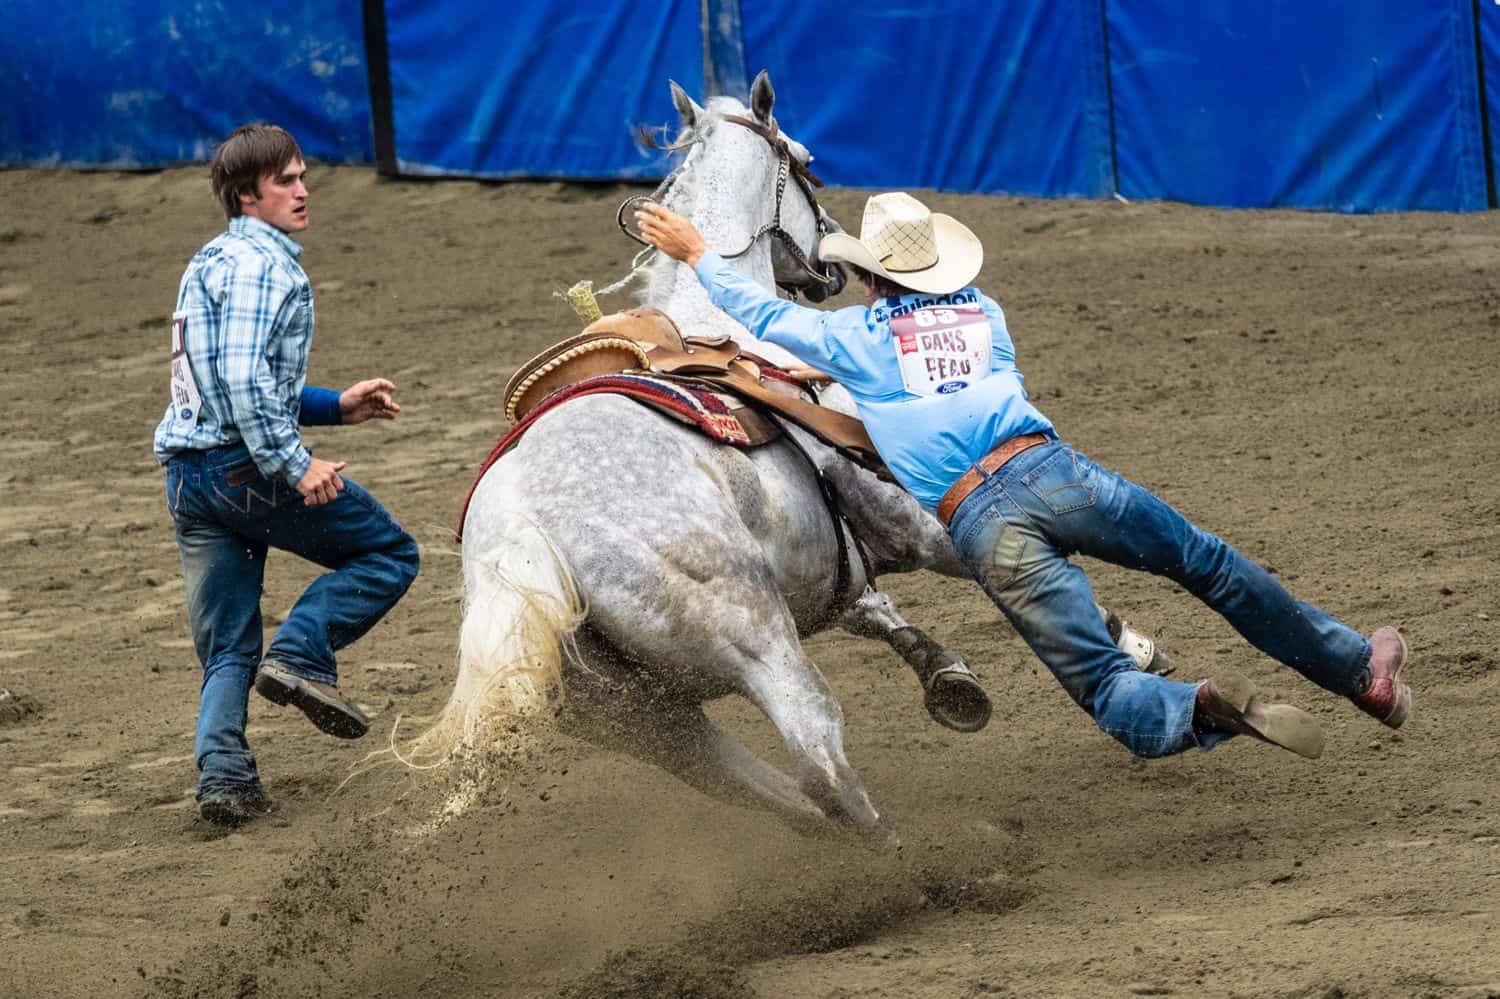 Two men in a rodeo event